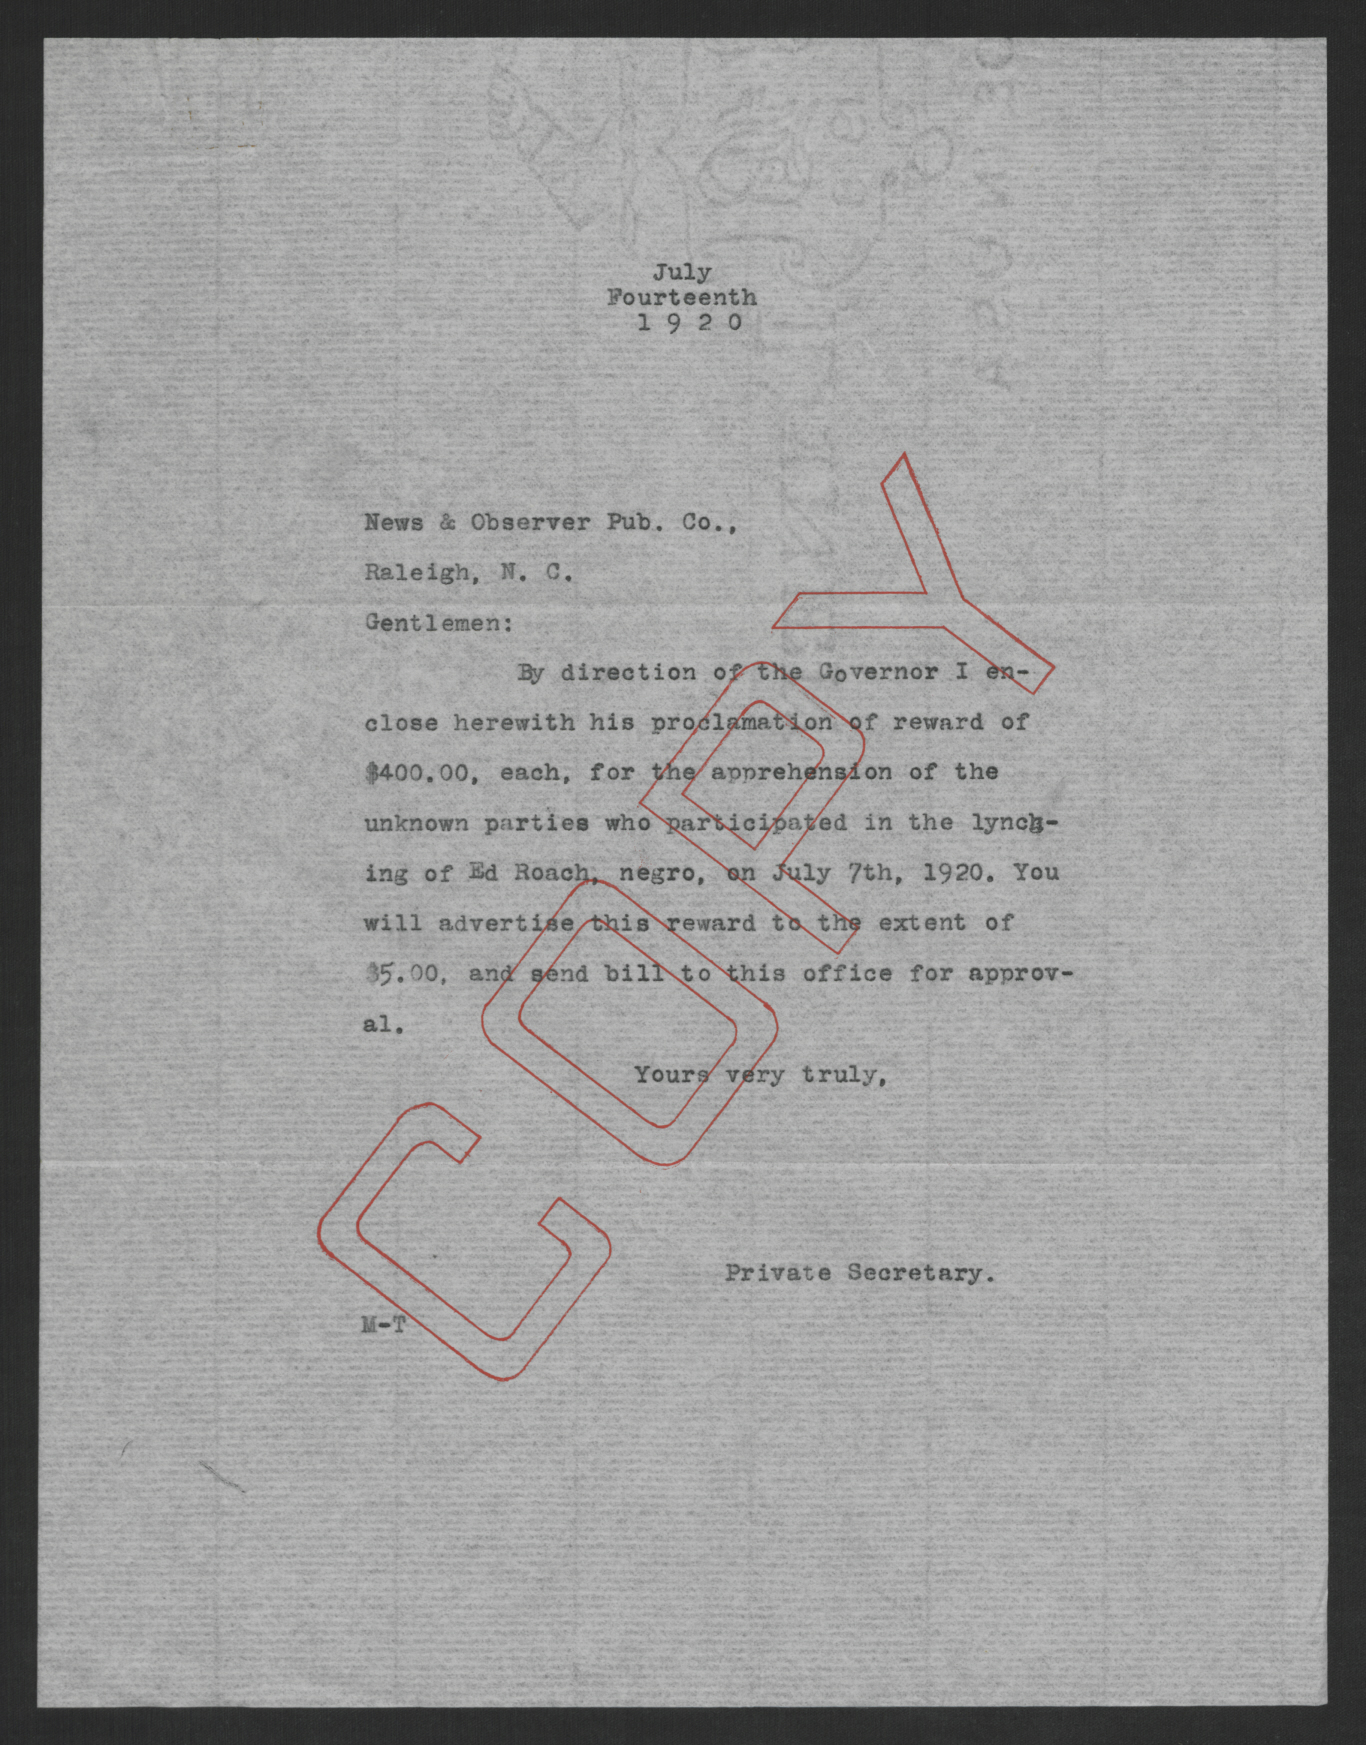 Letter from Santford Martin to the News & Observer, July 14, 1920